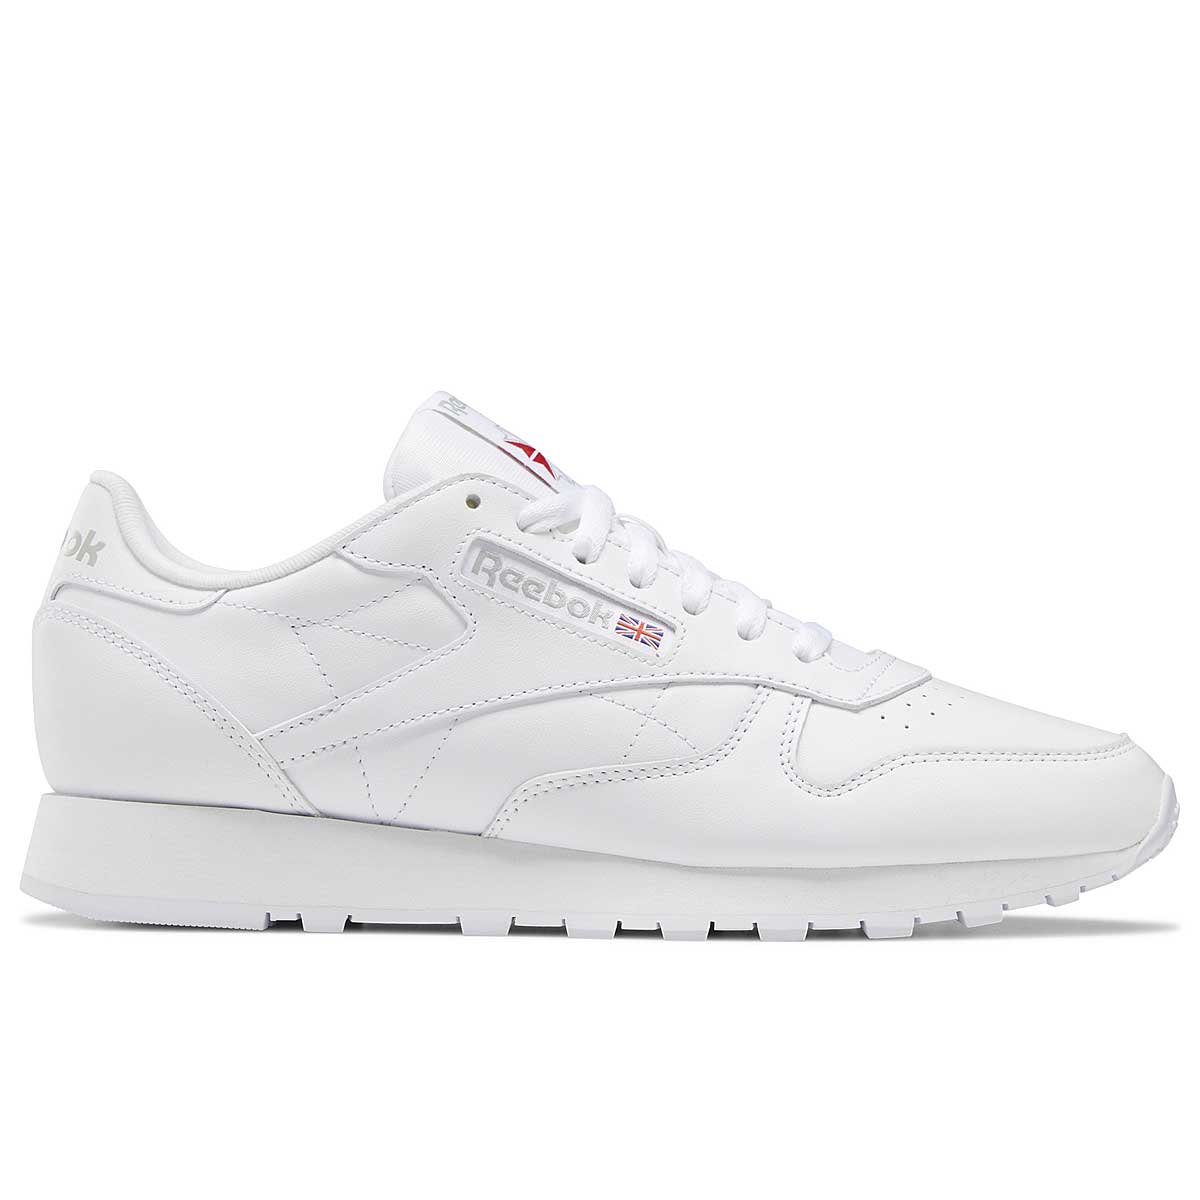 Reebok Classic Leather, Ftwwht/Ftwwht/Pugry3